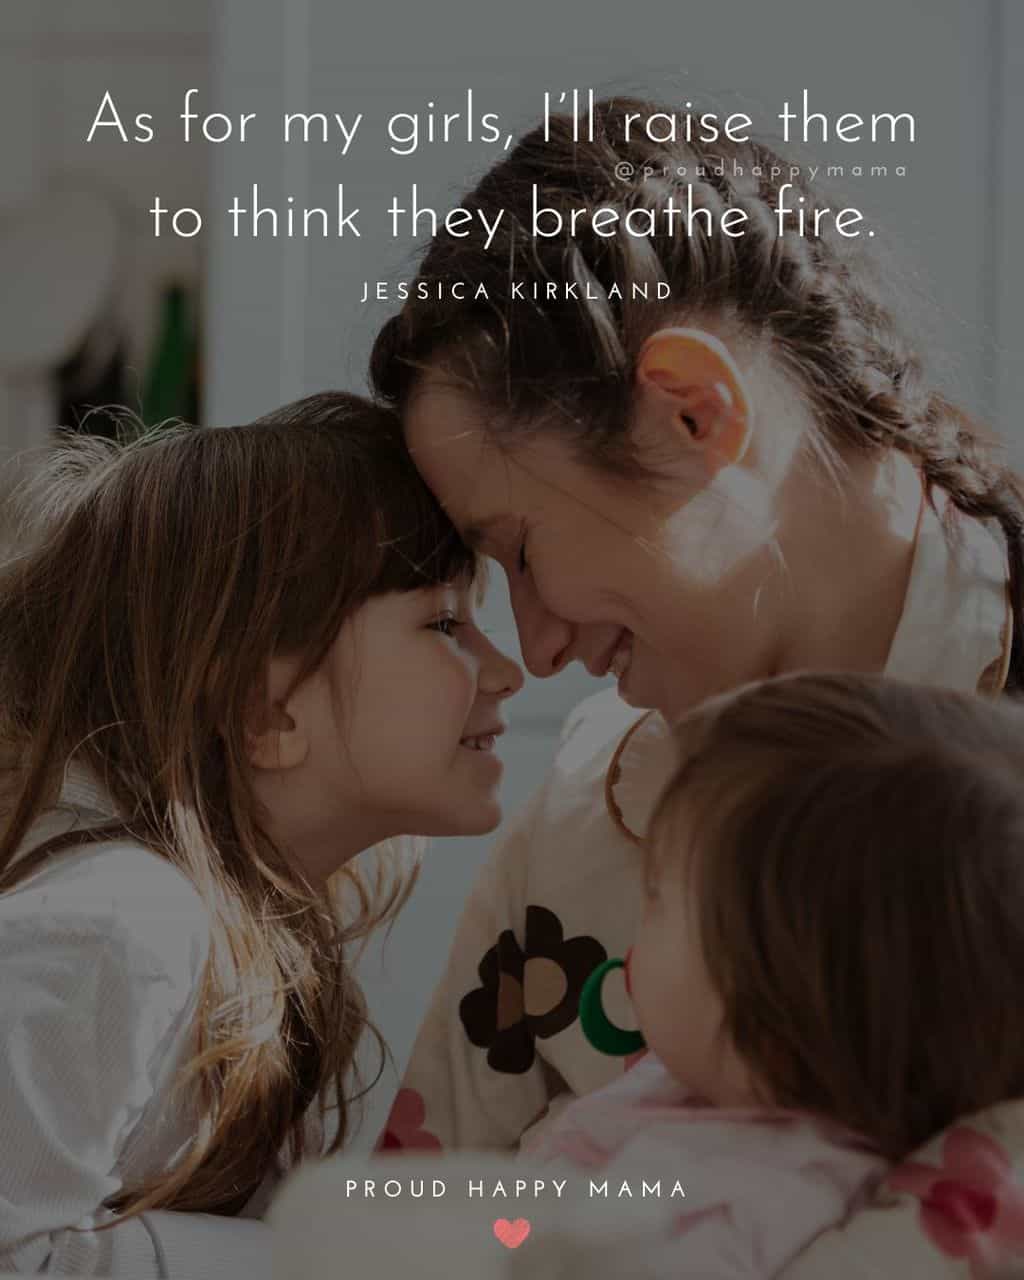 cute daughter quotes - ‘As for my girls, I’ll raise them to think they breathe fire.’ – Jessica Kirkland